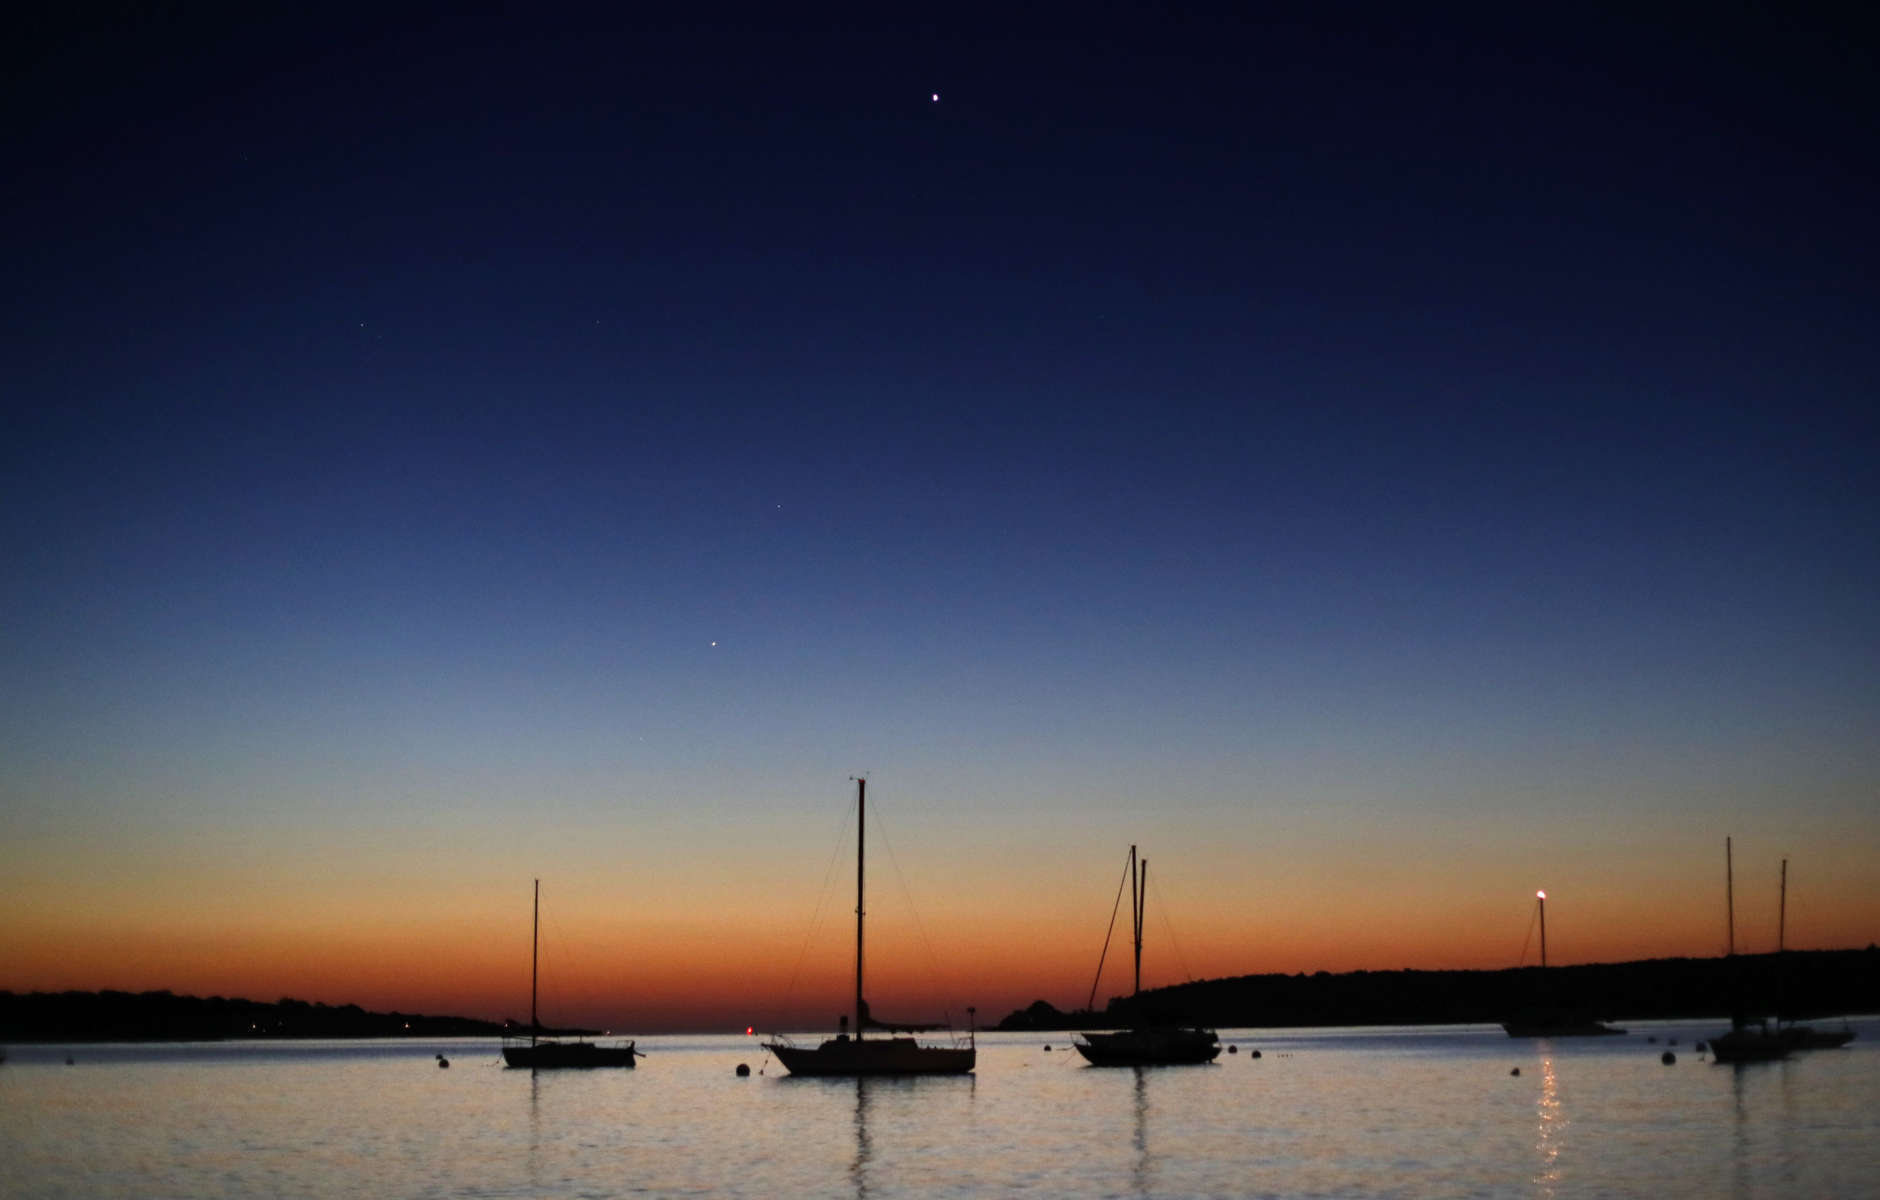 The planets Venus, top center, and Mars, lower left, rise in the eastern sky before sunrise off Willard Beach, Wednesday, Sept. 13, 2017, in South Portland, Maine. (AP Photo/Robert F. Bukaty)